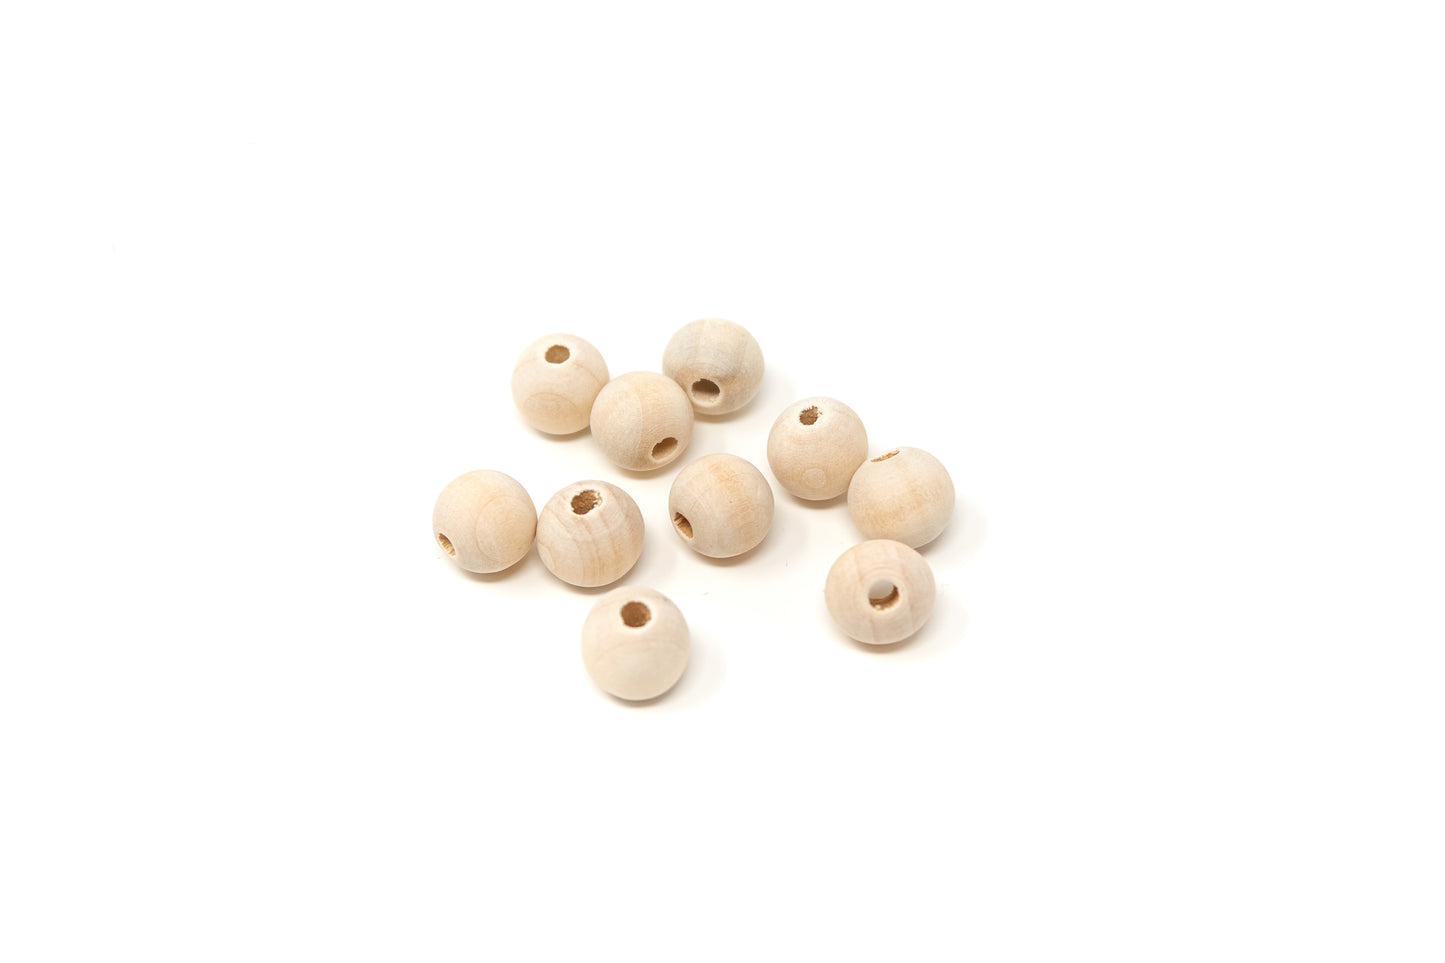 Natural Round Wood Beads 12mm 20 pieces - Cameos Art Shop